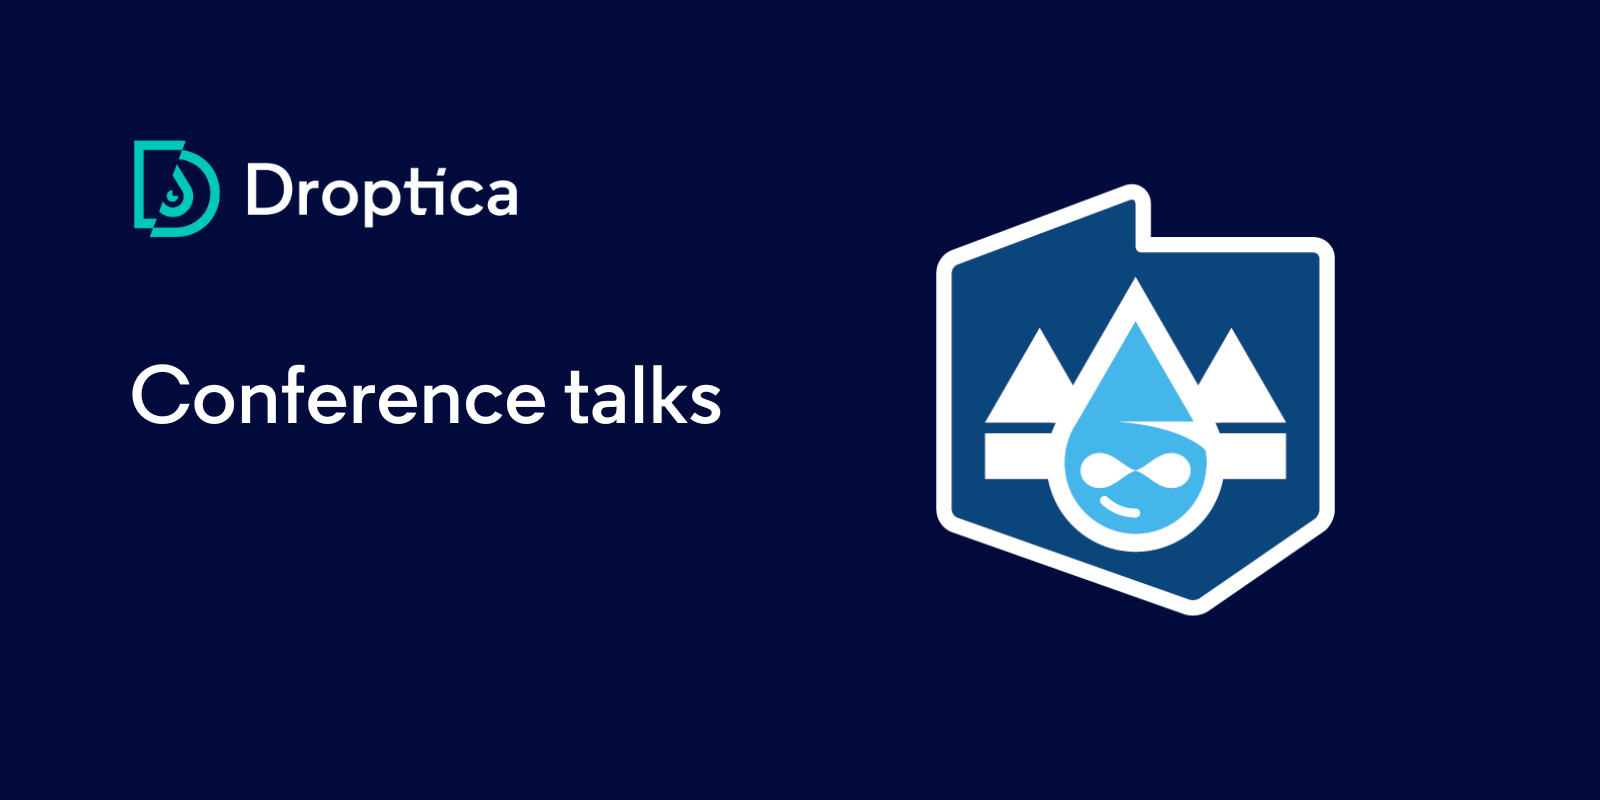 The Droptica specialists were speakers on the DrupalCamp Poland conference.